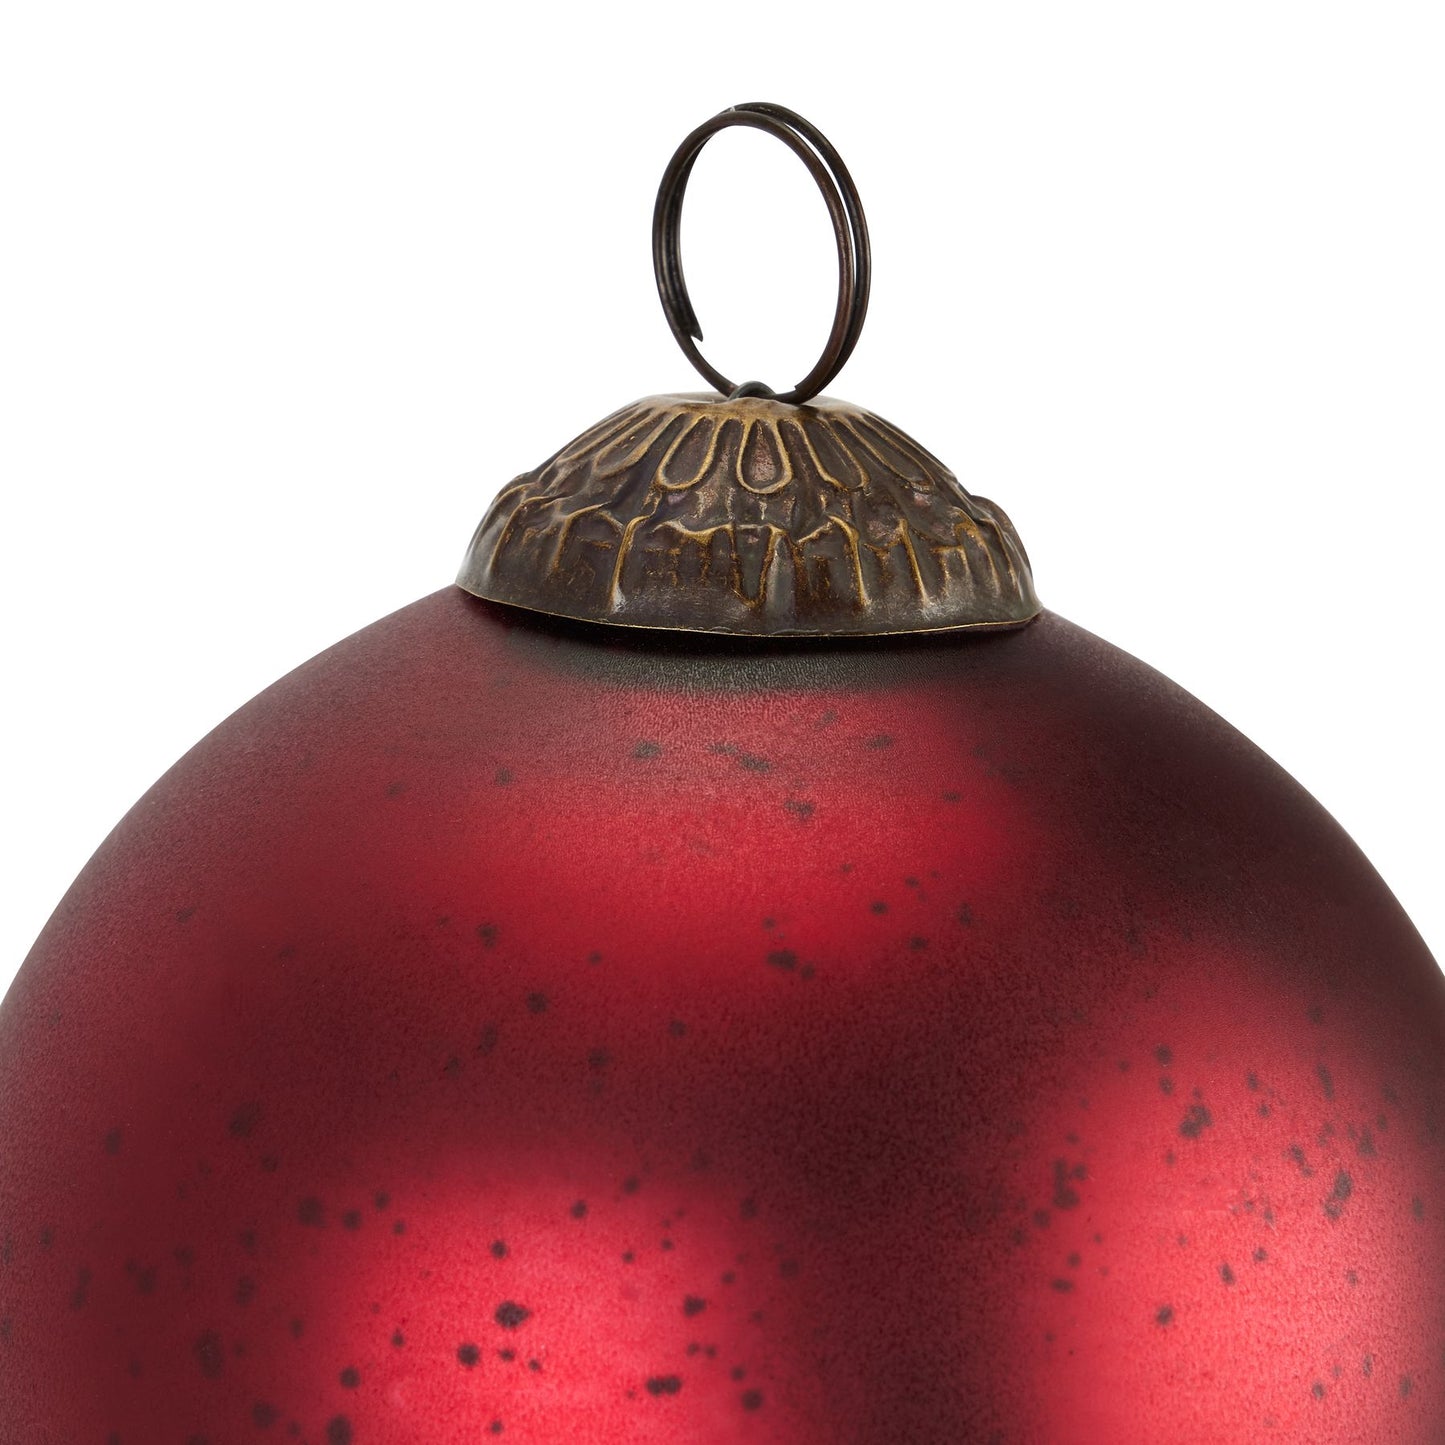 The Noel Collection Ruby Red Bauble